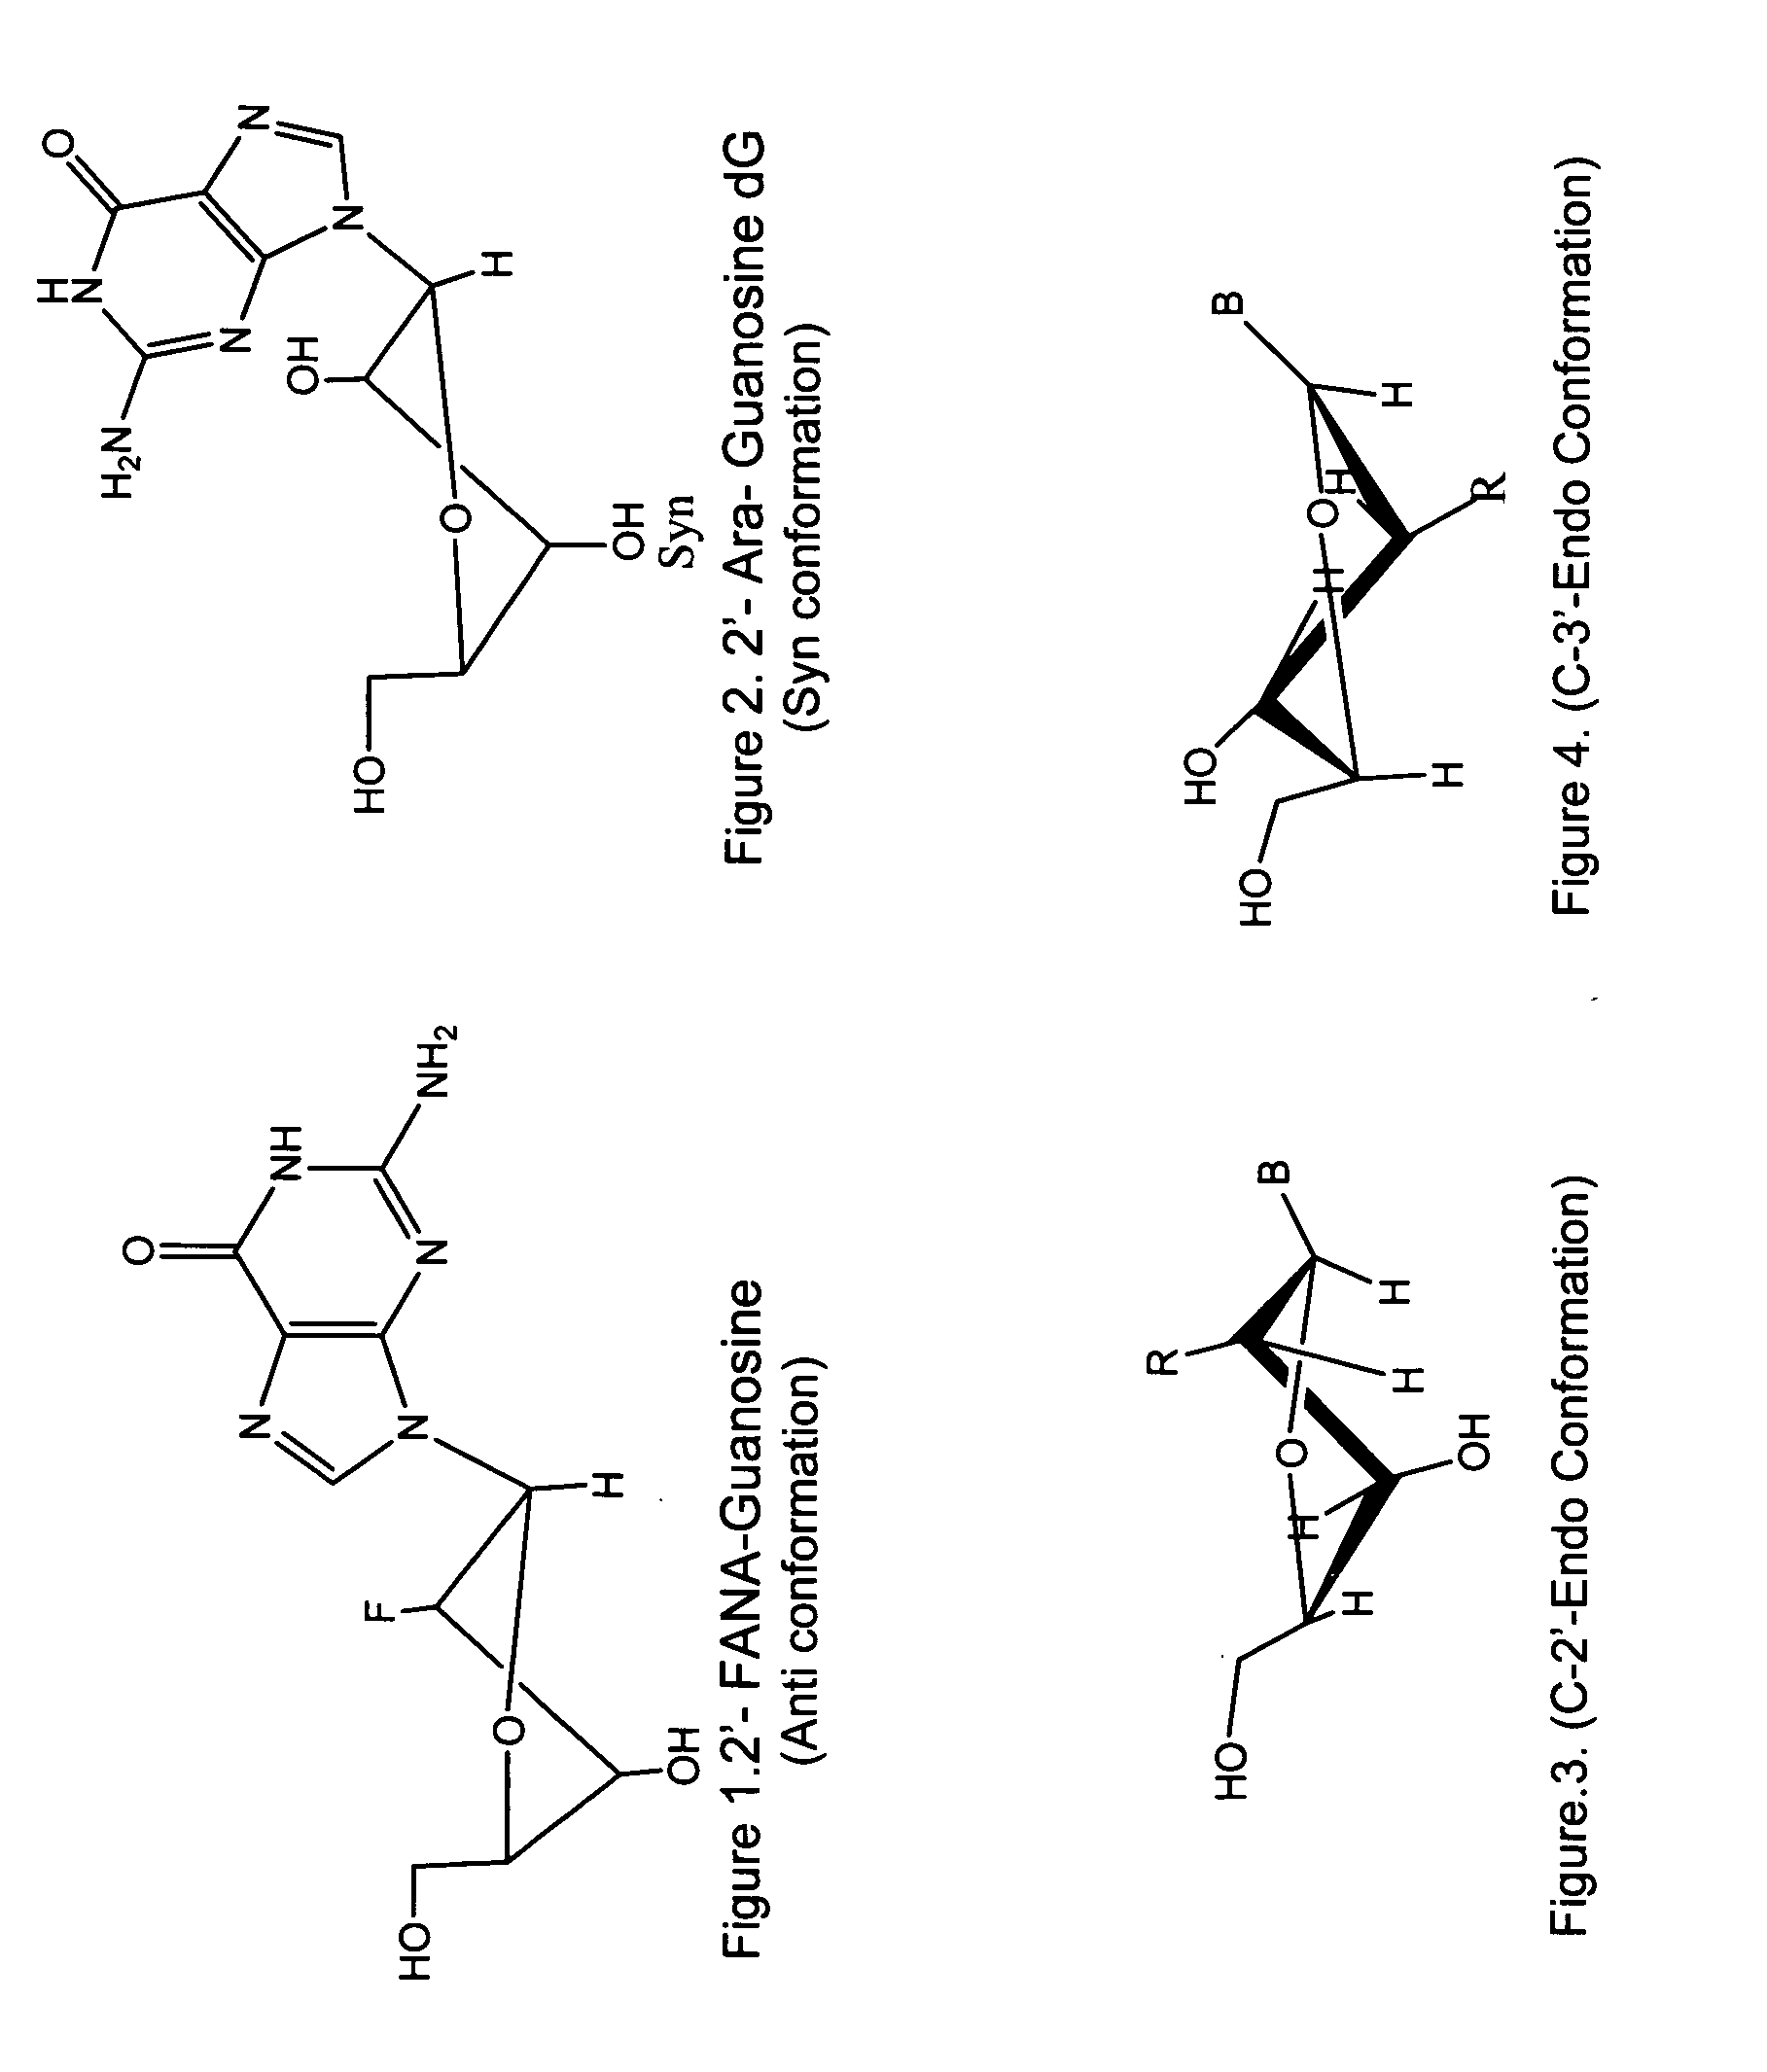 Synthesis of ara-2'-o-methyl-nucleosides, corresponding phosphoramidites and oligonucleotides incorporating novel modifications for biological application in therapeuctics, diagnostics, g- tetrad forming oligonucleotides and aptamers